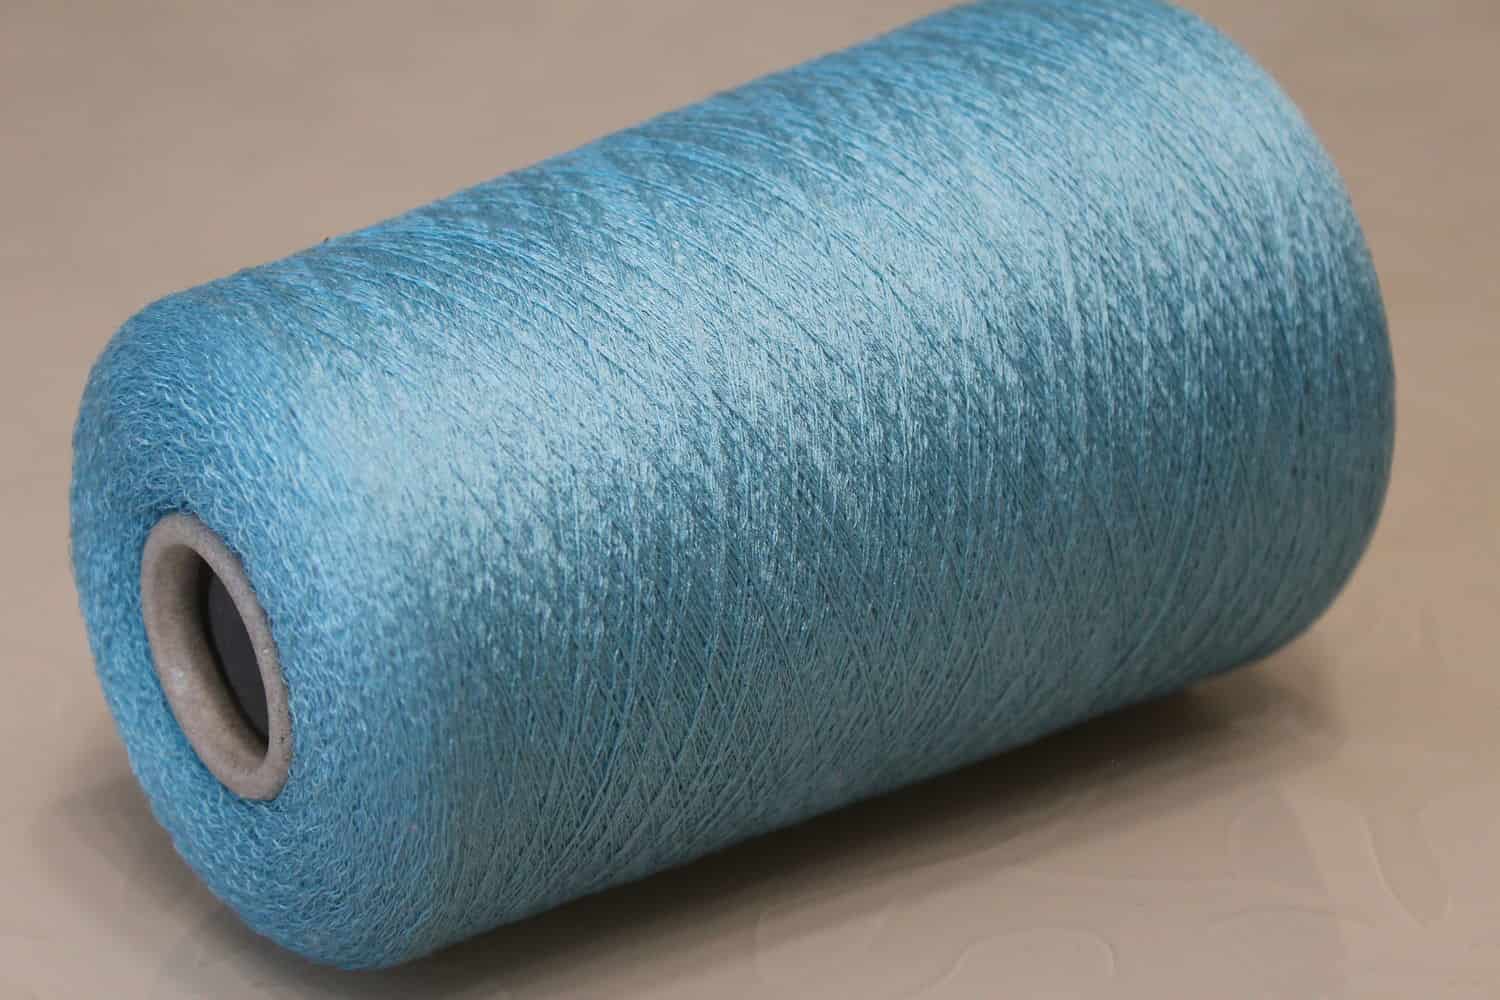  Buy Bamboo Matka Silk Yarn At an Exceptional Price 